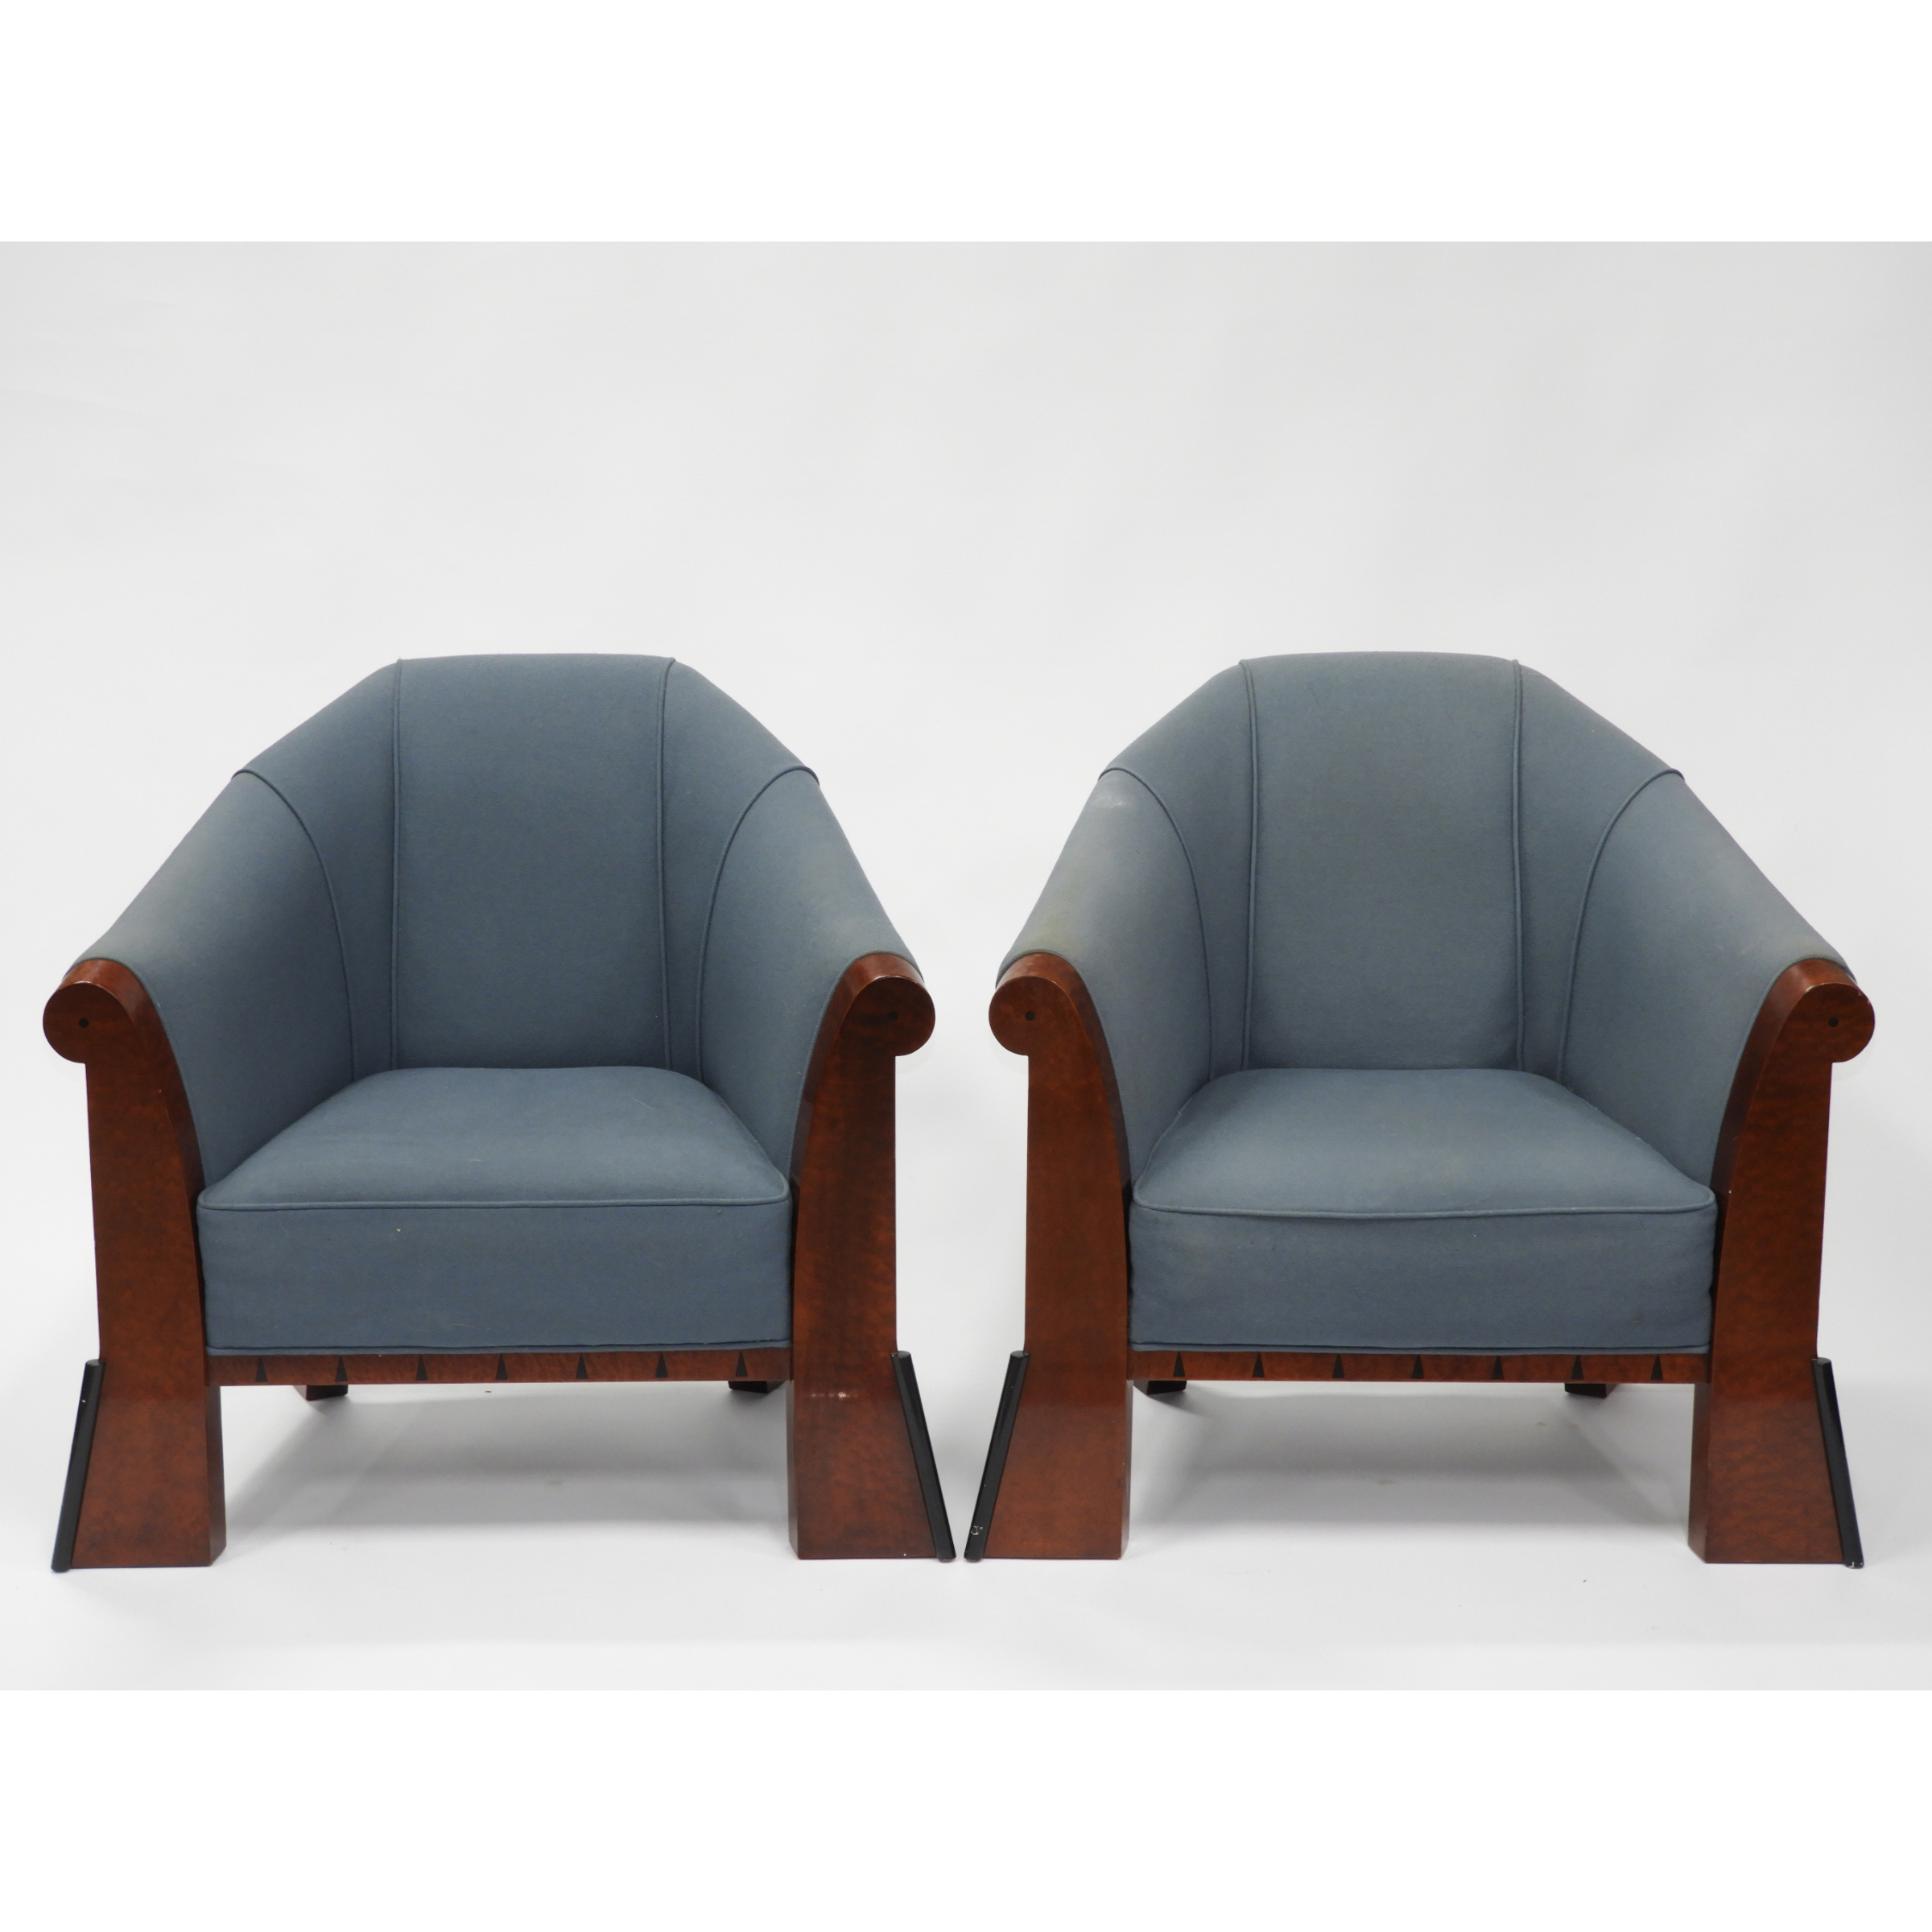 Pair of Lounge Chairs by Michael Graves for Sunar Hauserman, c.1980